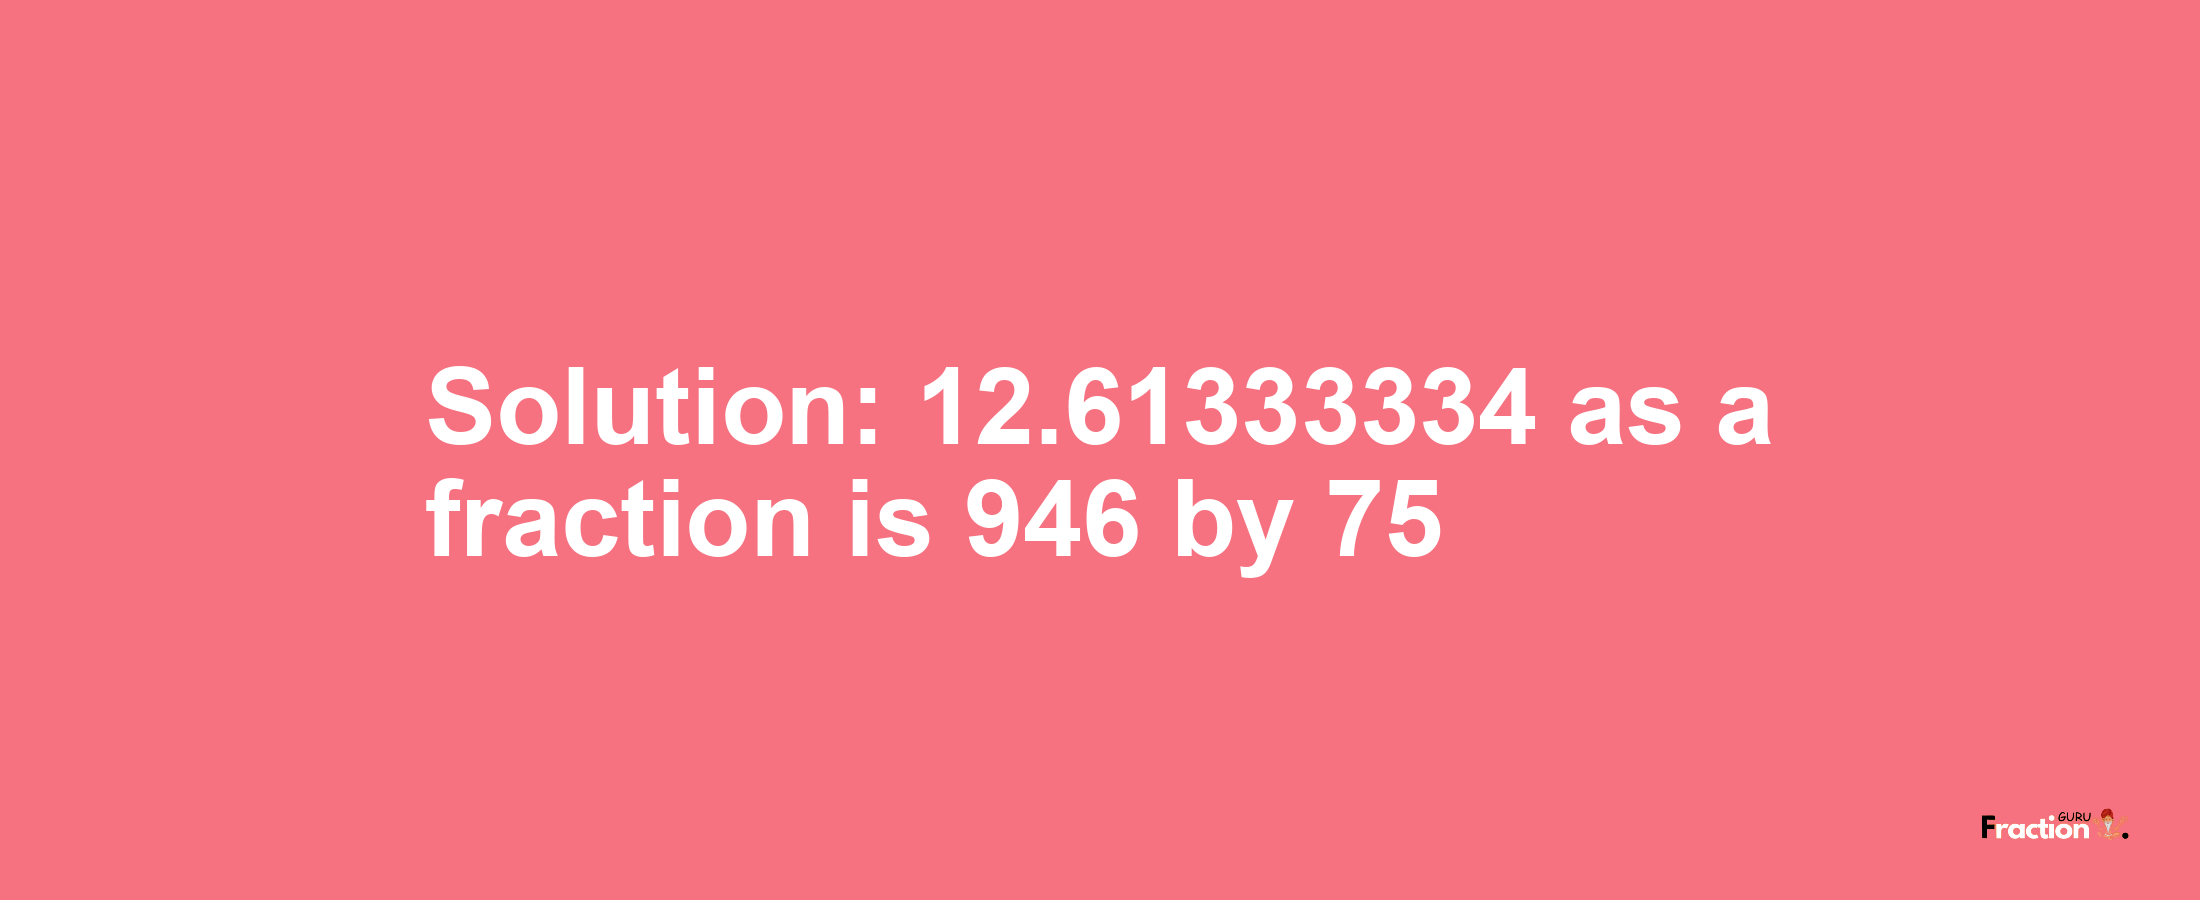 Solution:12.61333334 as a fraction is 946/75